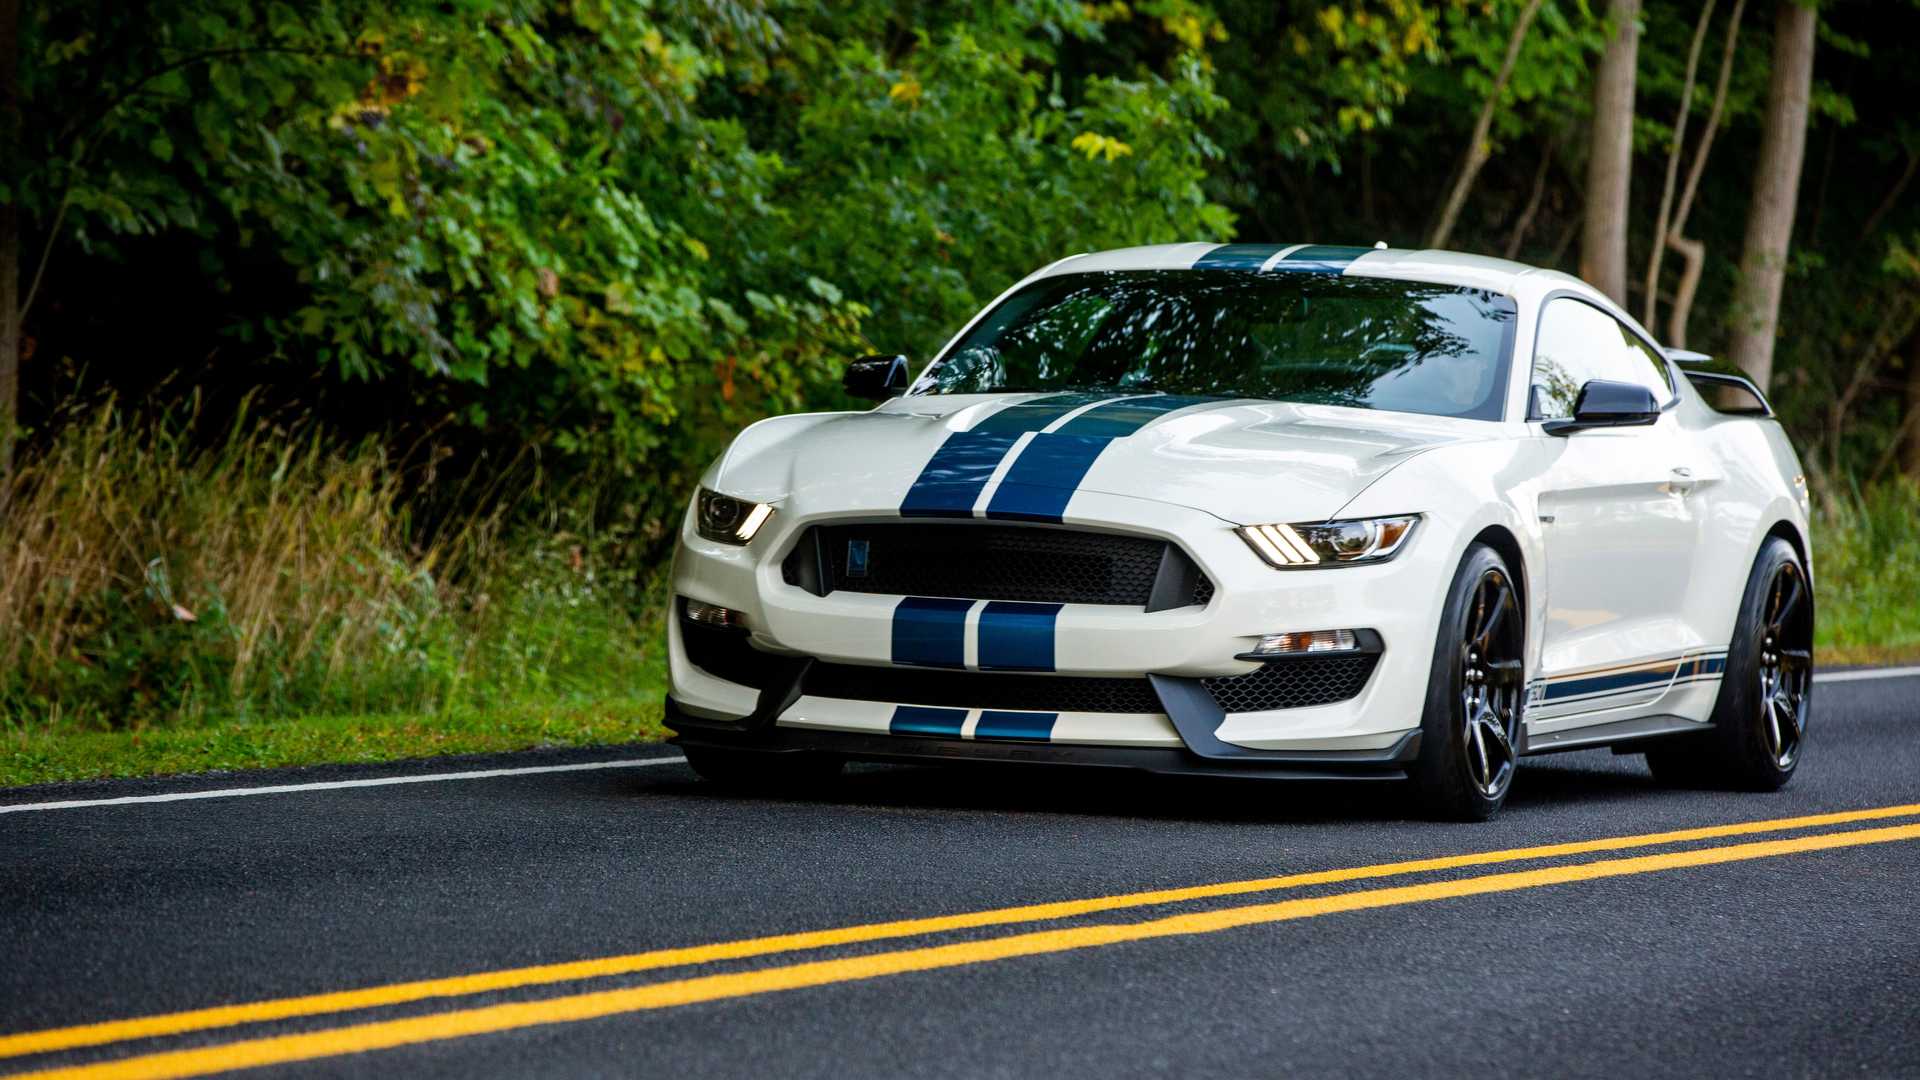 Mustang Of The Day: 2020 Ford Shelby GT350R Heritage Edition